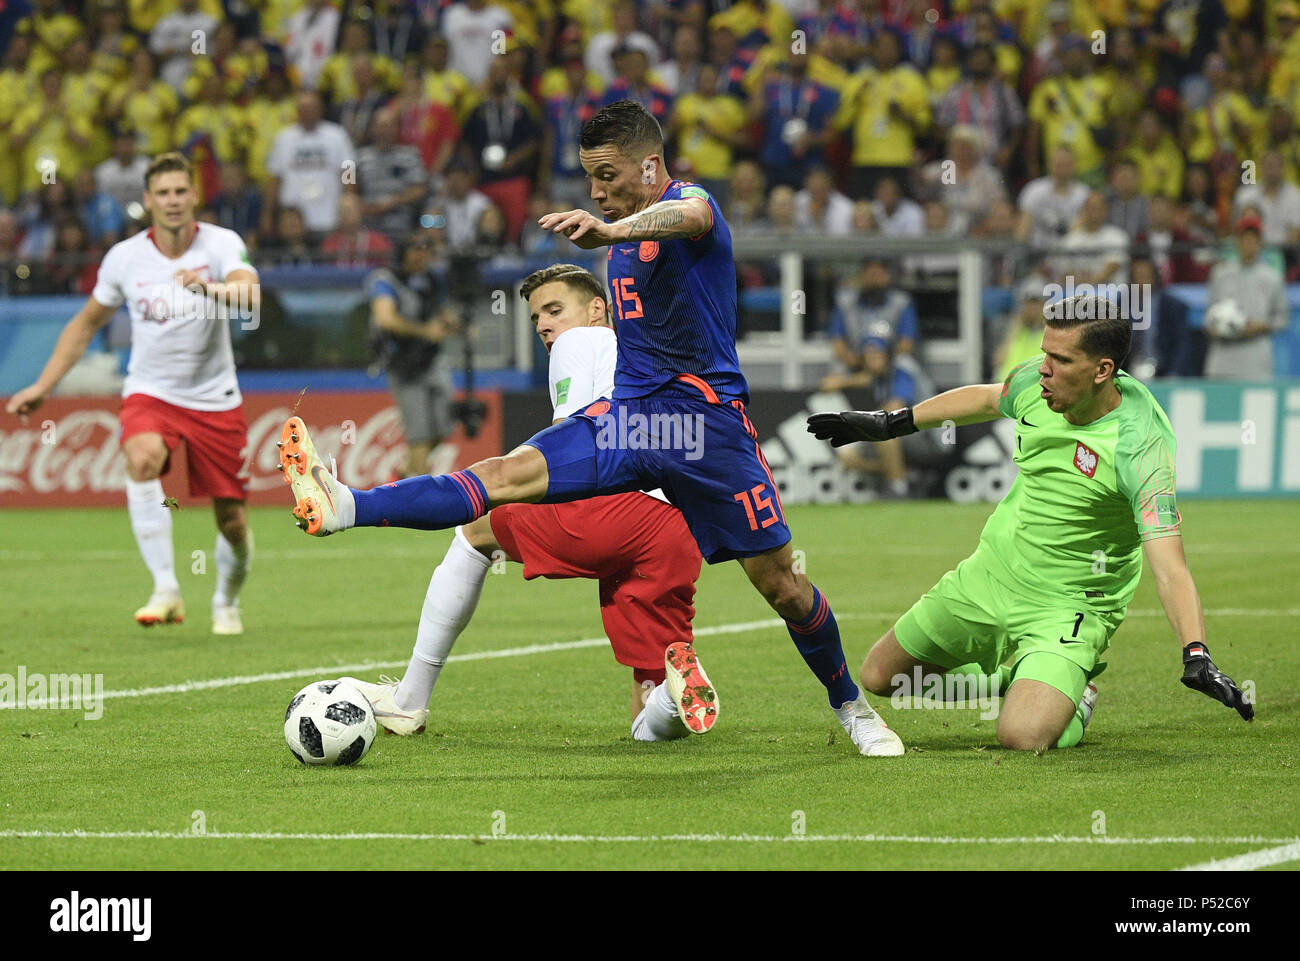 Kazan, Russia. 24th June, 2018. Mateus Uribe (front) of Colombia competes during the 2018 FIFA World Cup Group H match between Poland and Colombia in Kazan, Russia, June 24, 2018. Colombia won 3-0. Credit: Lui Siu Wai/Xinhua/Alamy Live News Stock Photo